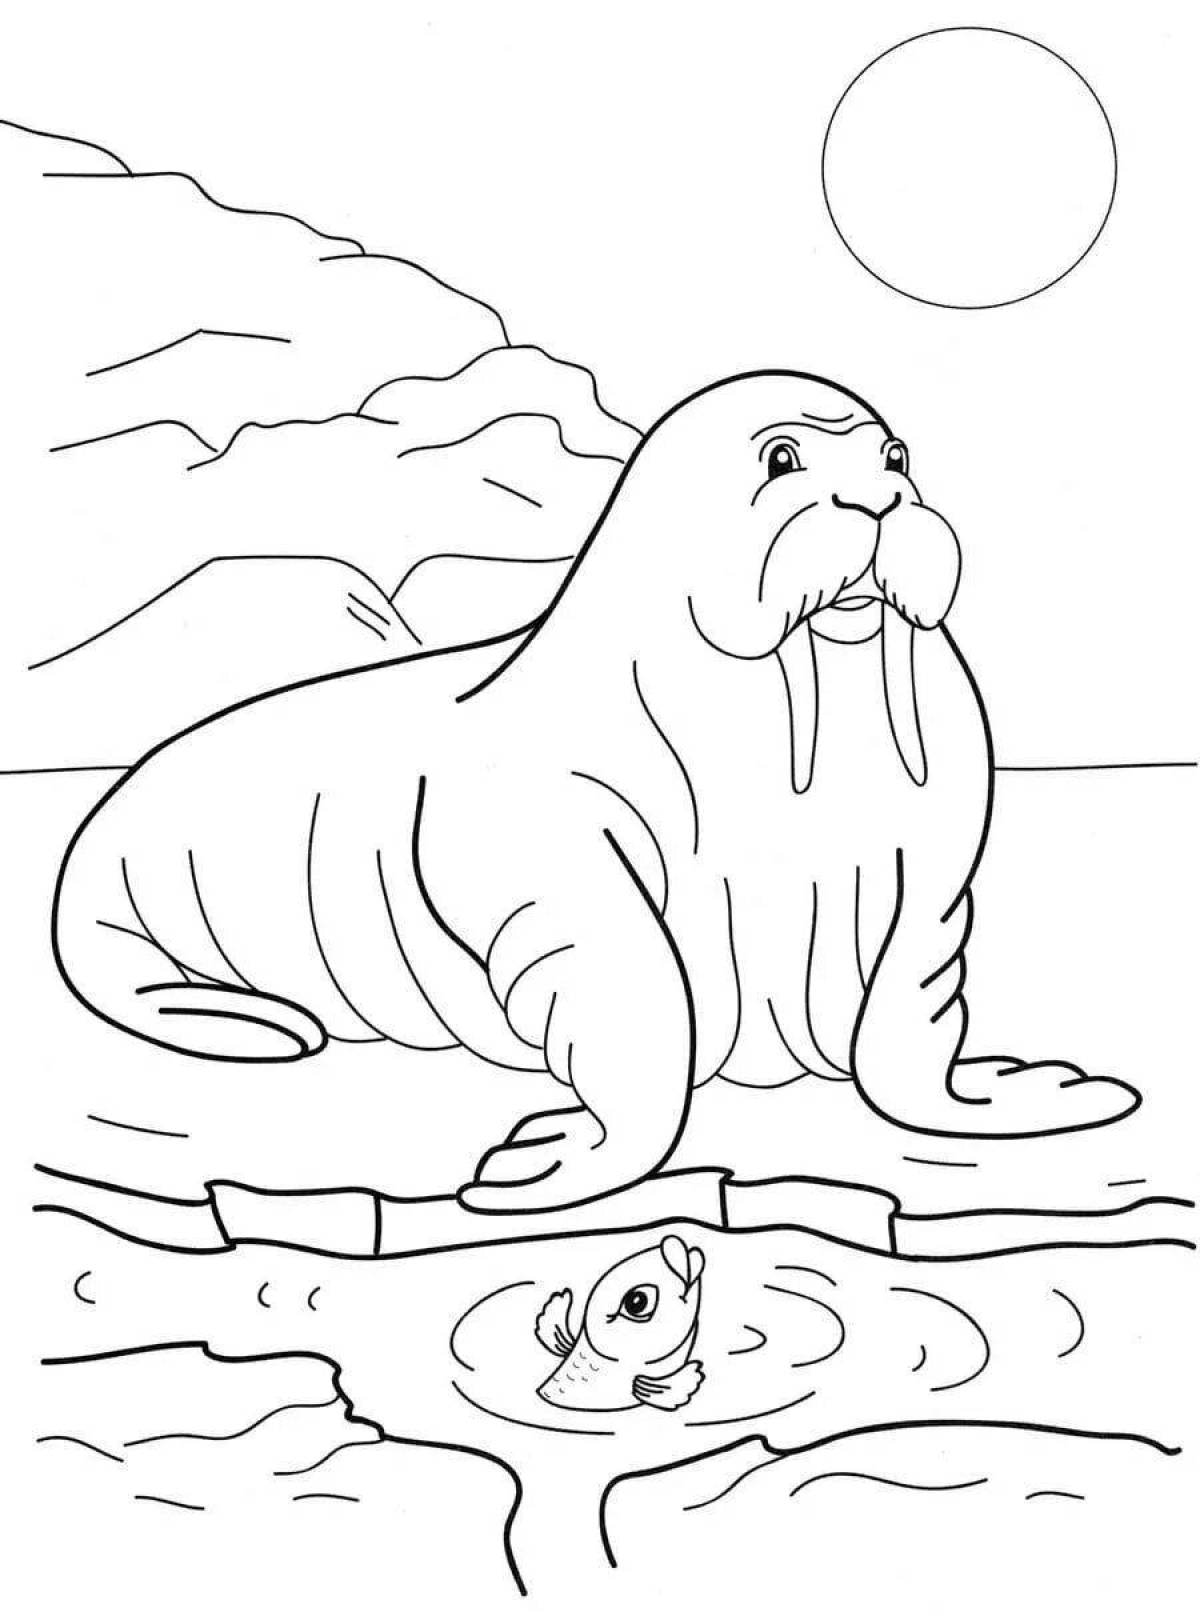 Shiny northern animal coloring book for kindergarten